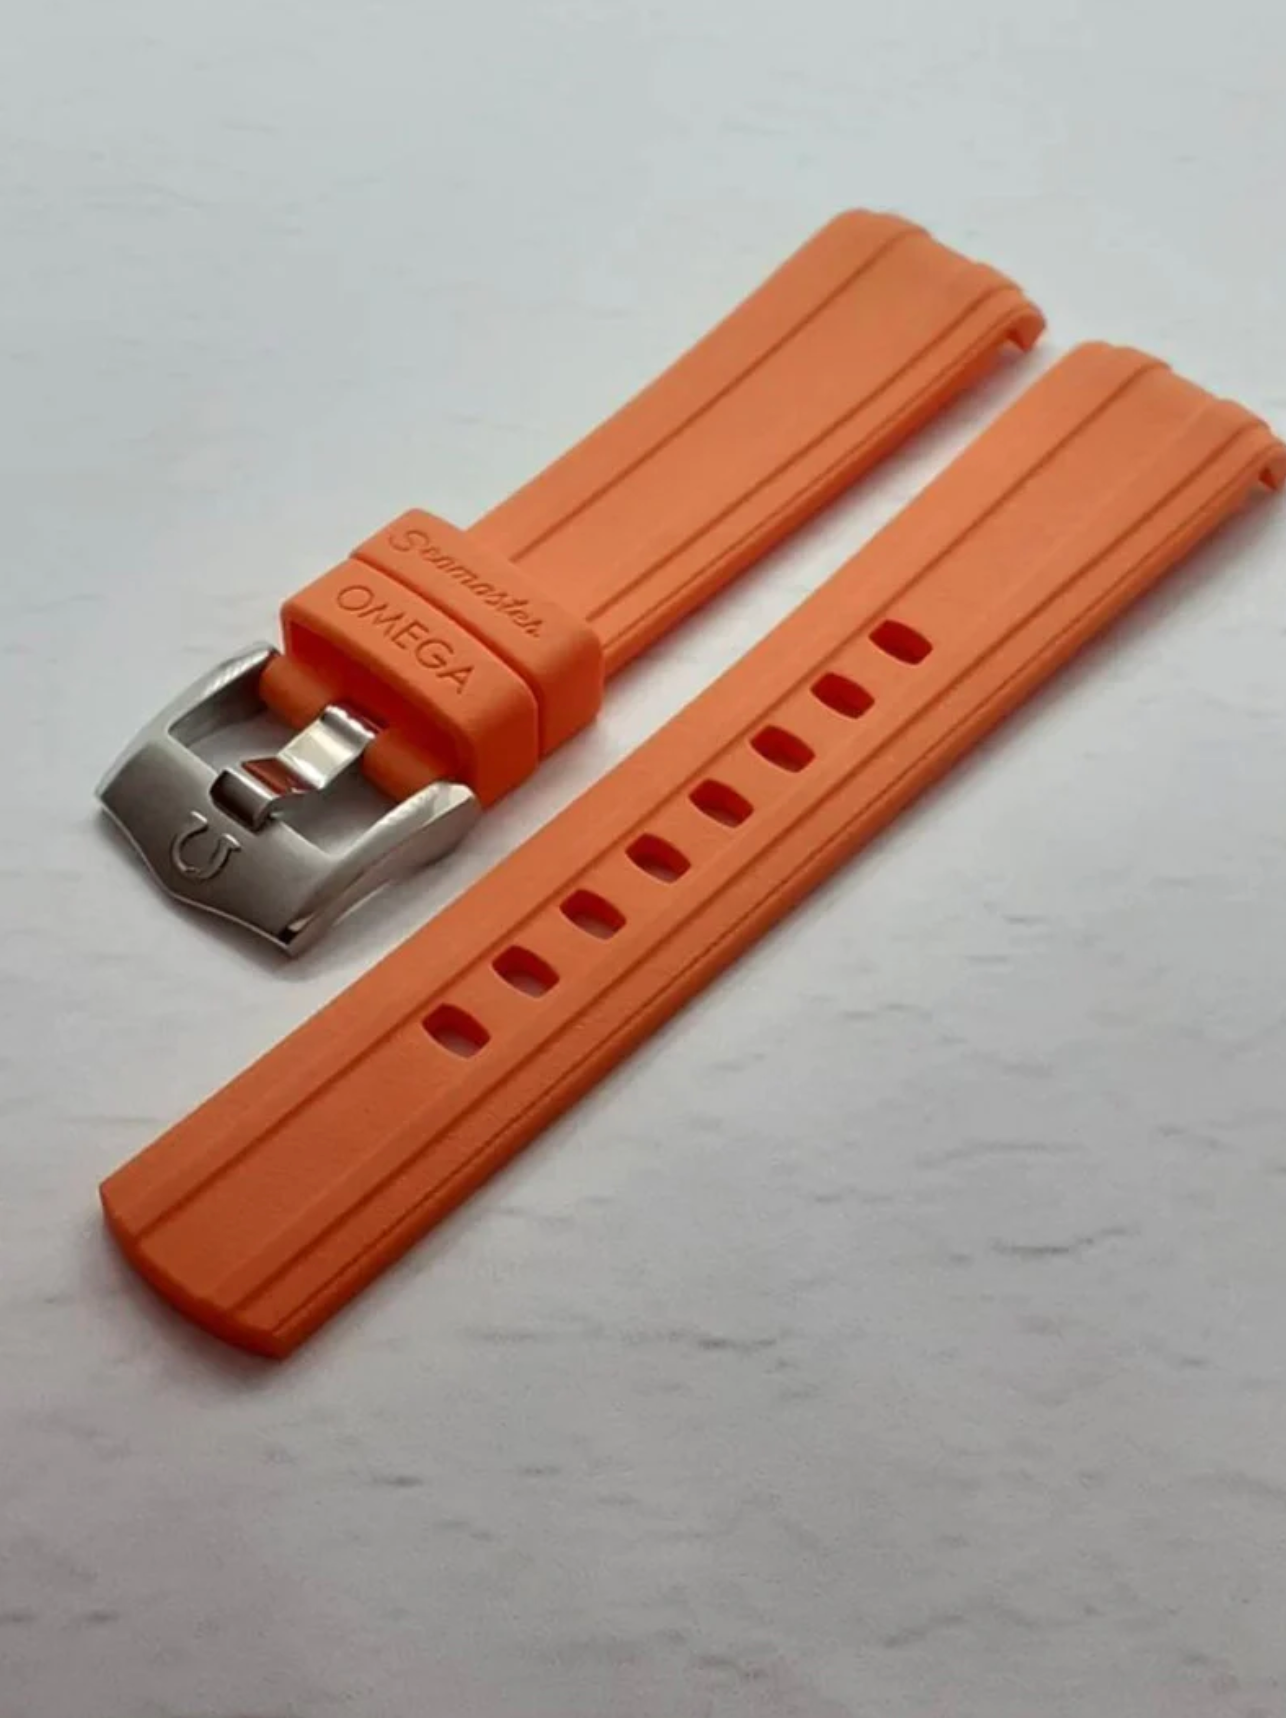 20mm Silicone Rubber MoonSwatch watch band replacement for omega Seamaster Diver 300m